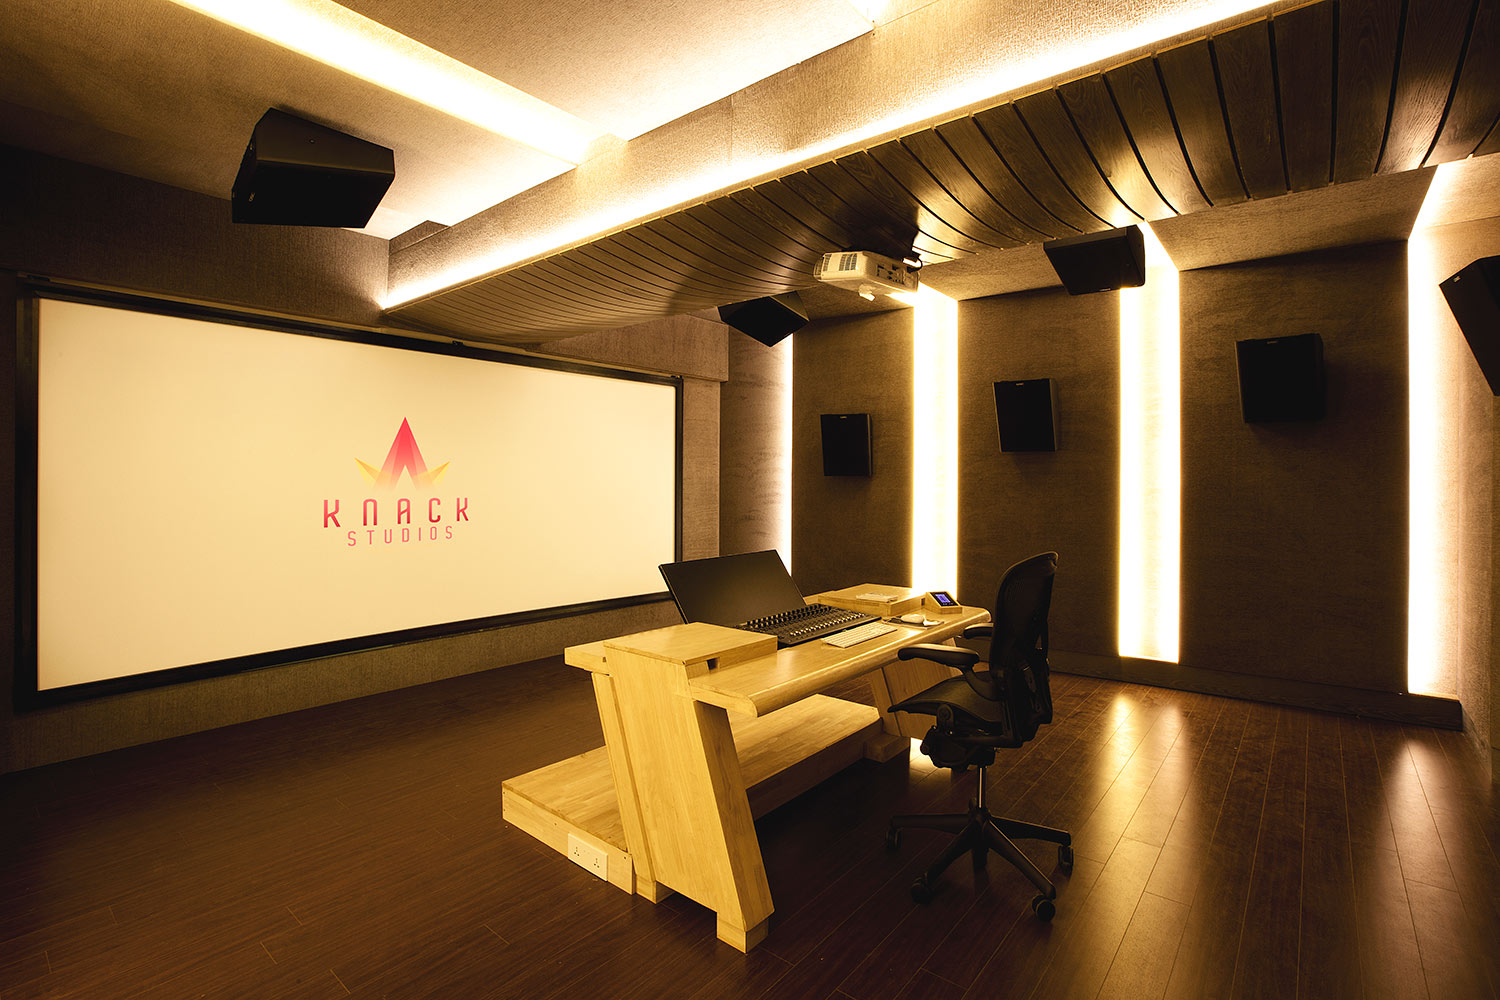 Envisioned as a major resource for India’s thriving Bollywood film industry, KNACK Studios is the first world-class post-production complex in Eastern India.  To provide clients with the ultimate facility design, the KNACK executive group retained global architectural/acoustic consultants, WSDG Walters-Storyk Design Group. Dolby Atmos Post-Production Suite